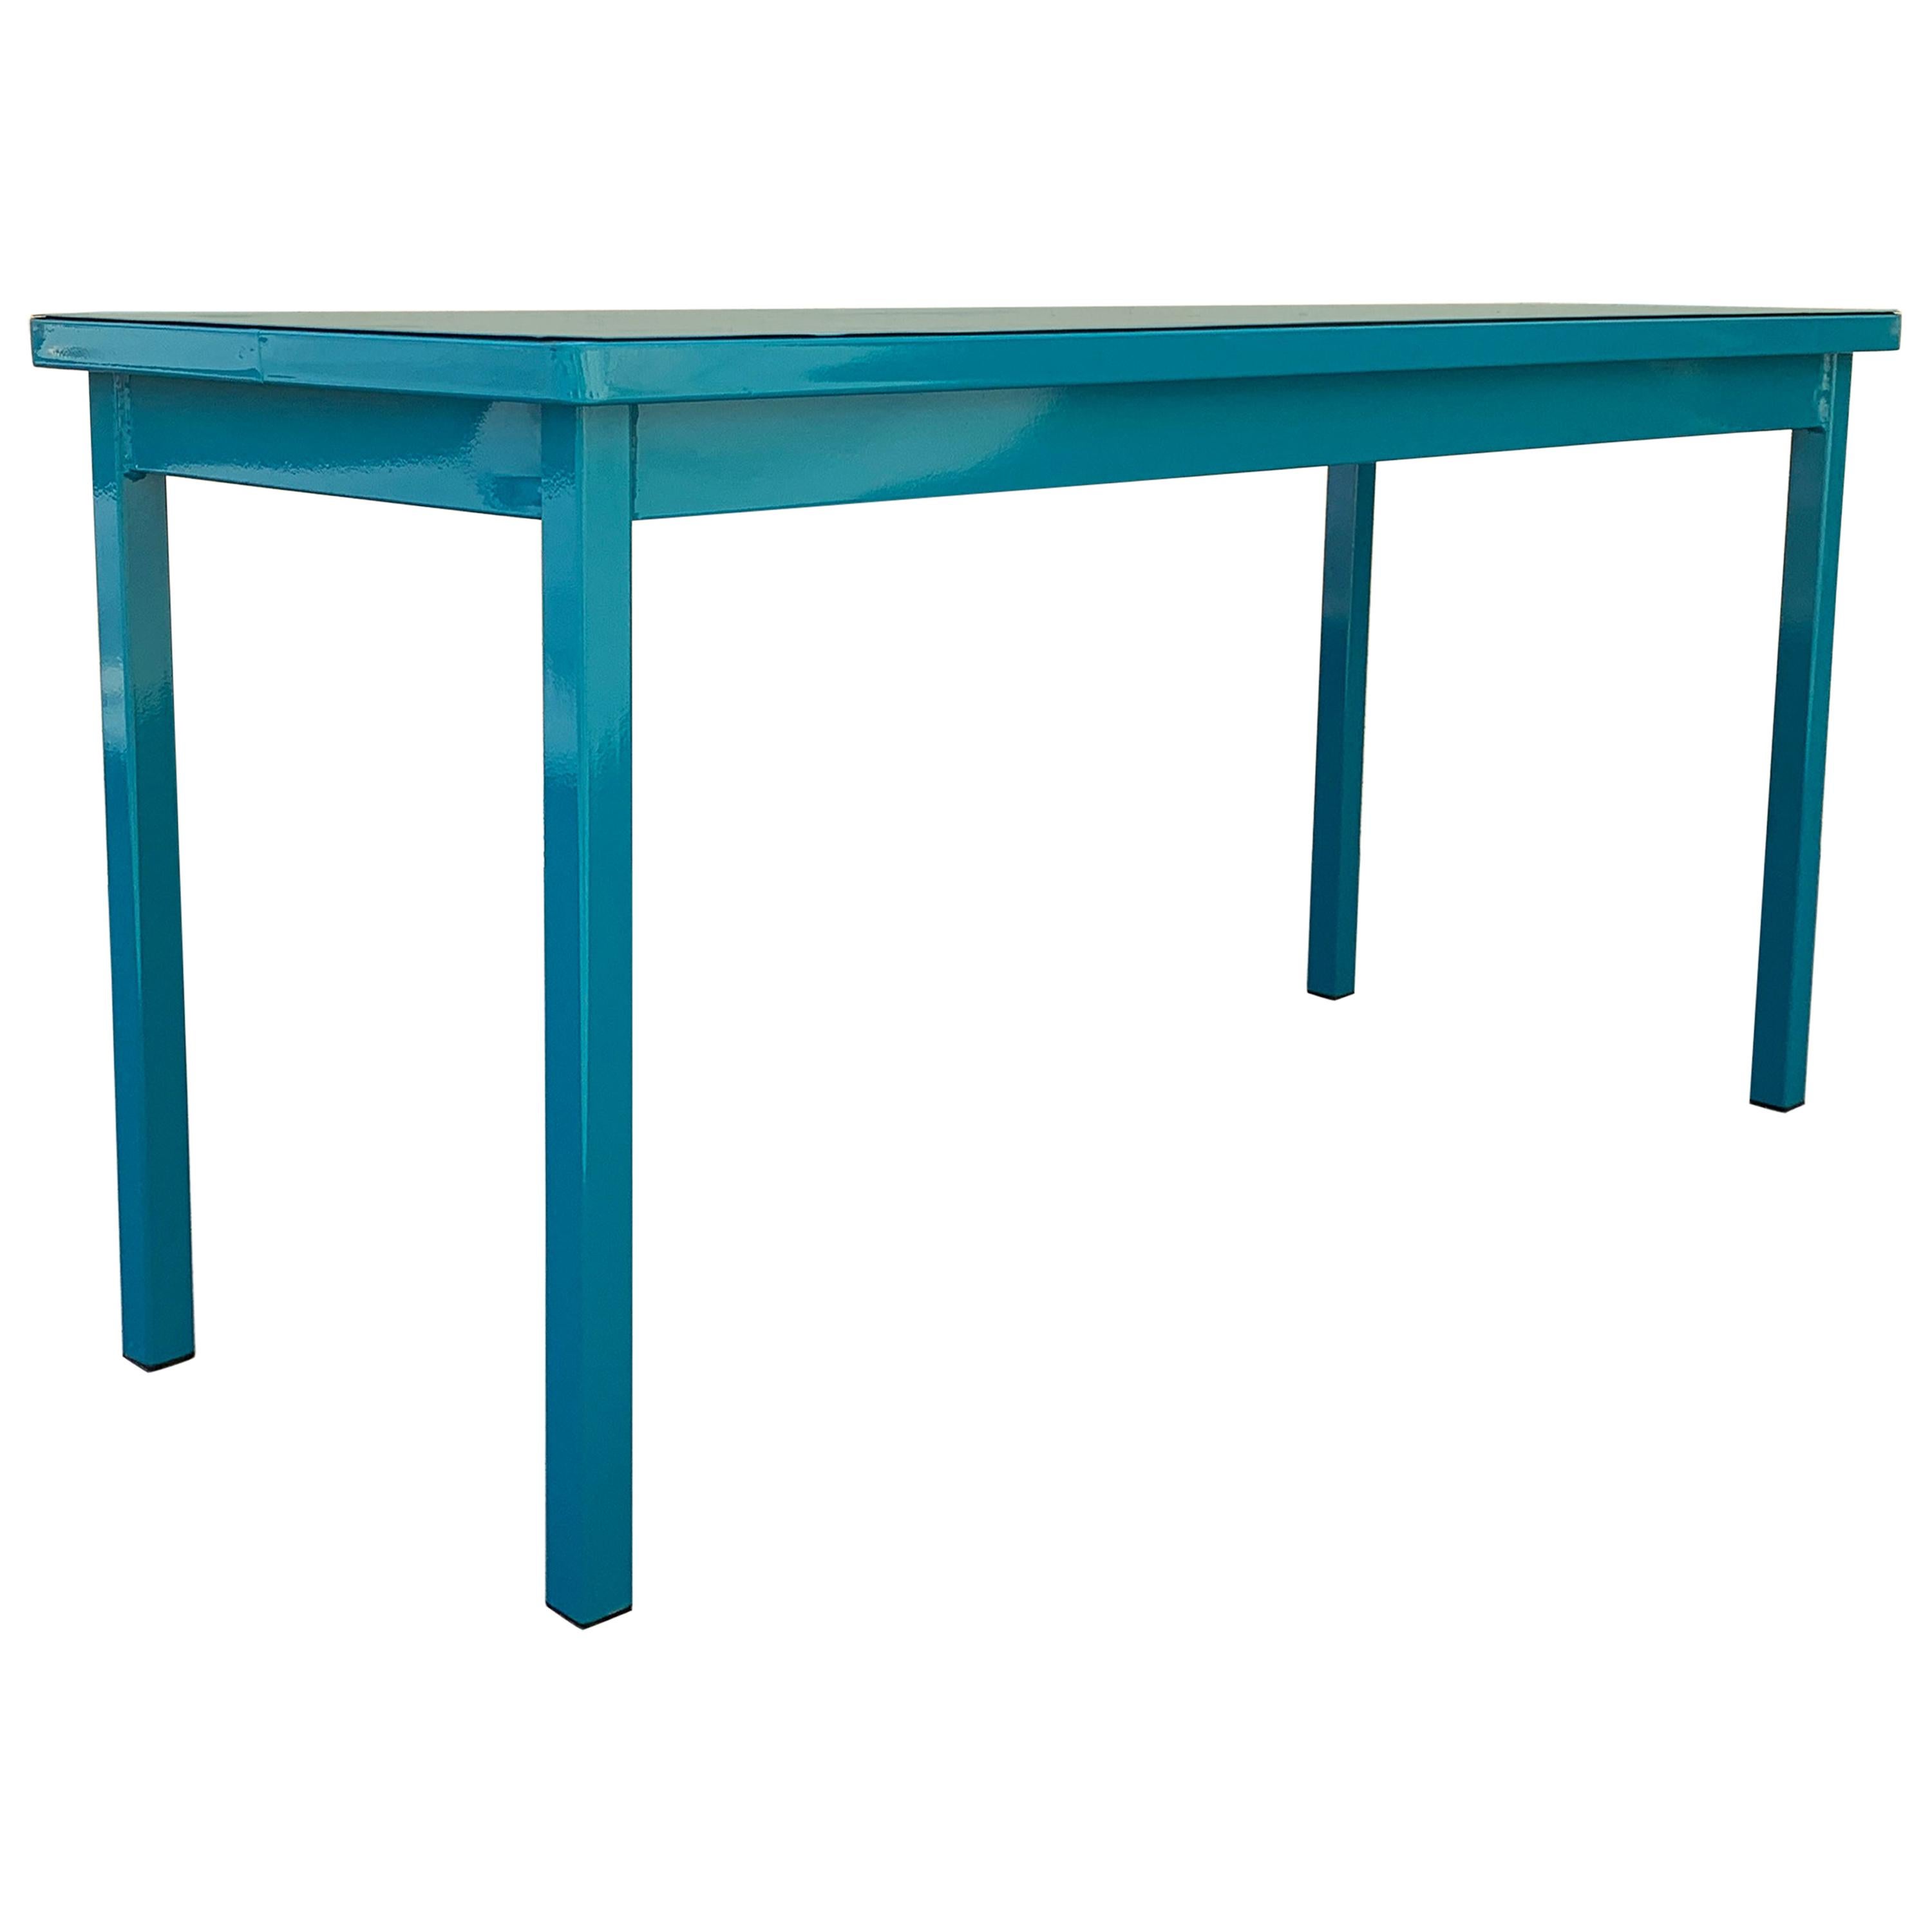 Midcentury Tanker Table in an Uncommon Size, Refinished in Teal For Sale